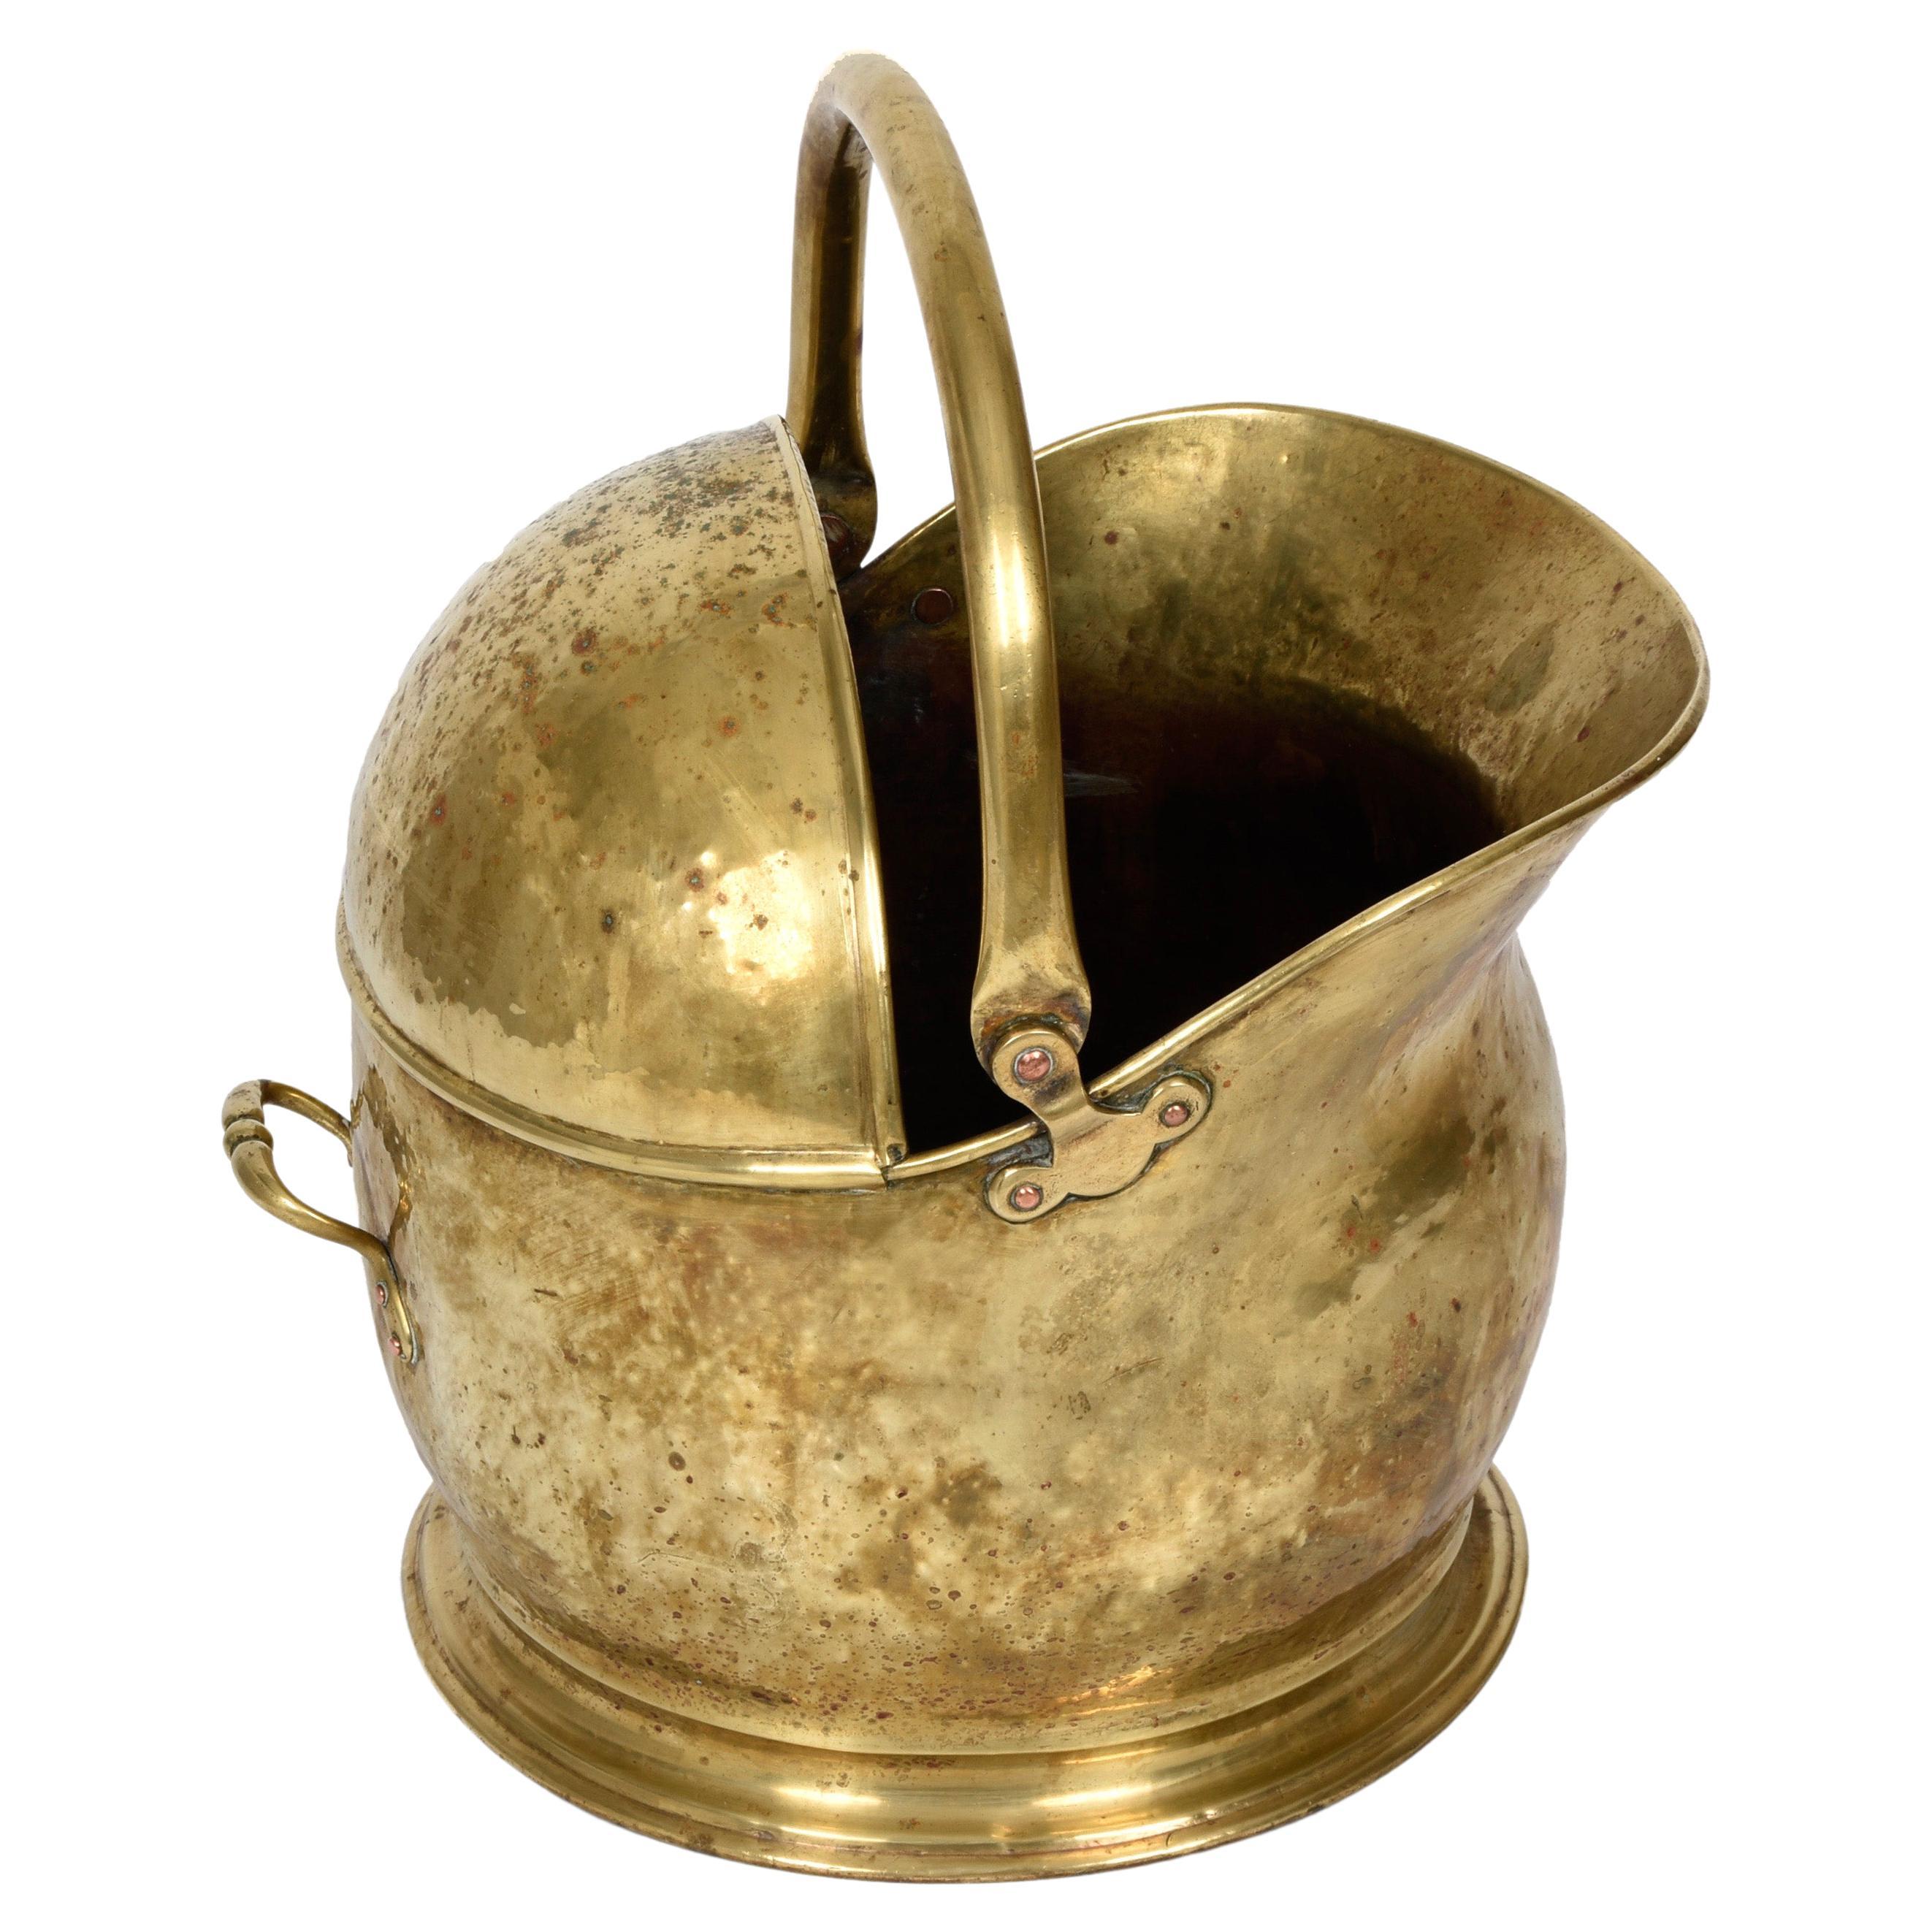 Helmet-shaped brass coal bucket from the early 1900s, Italy, 1930s